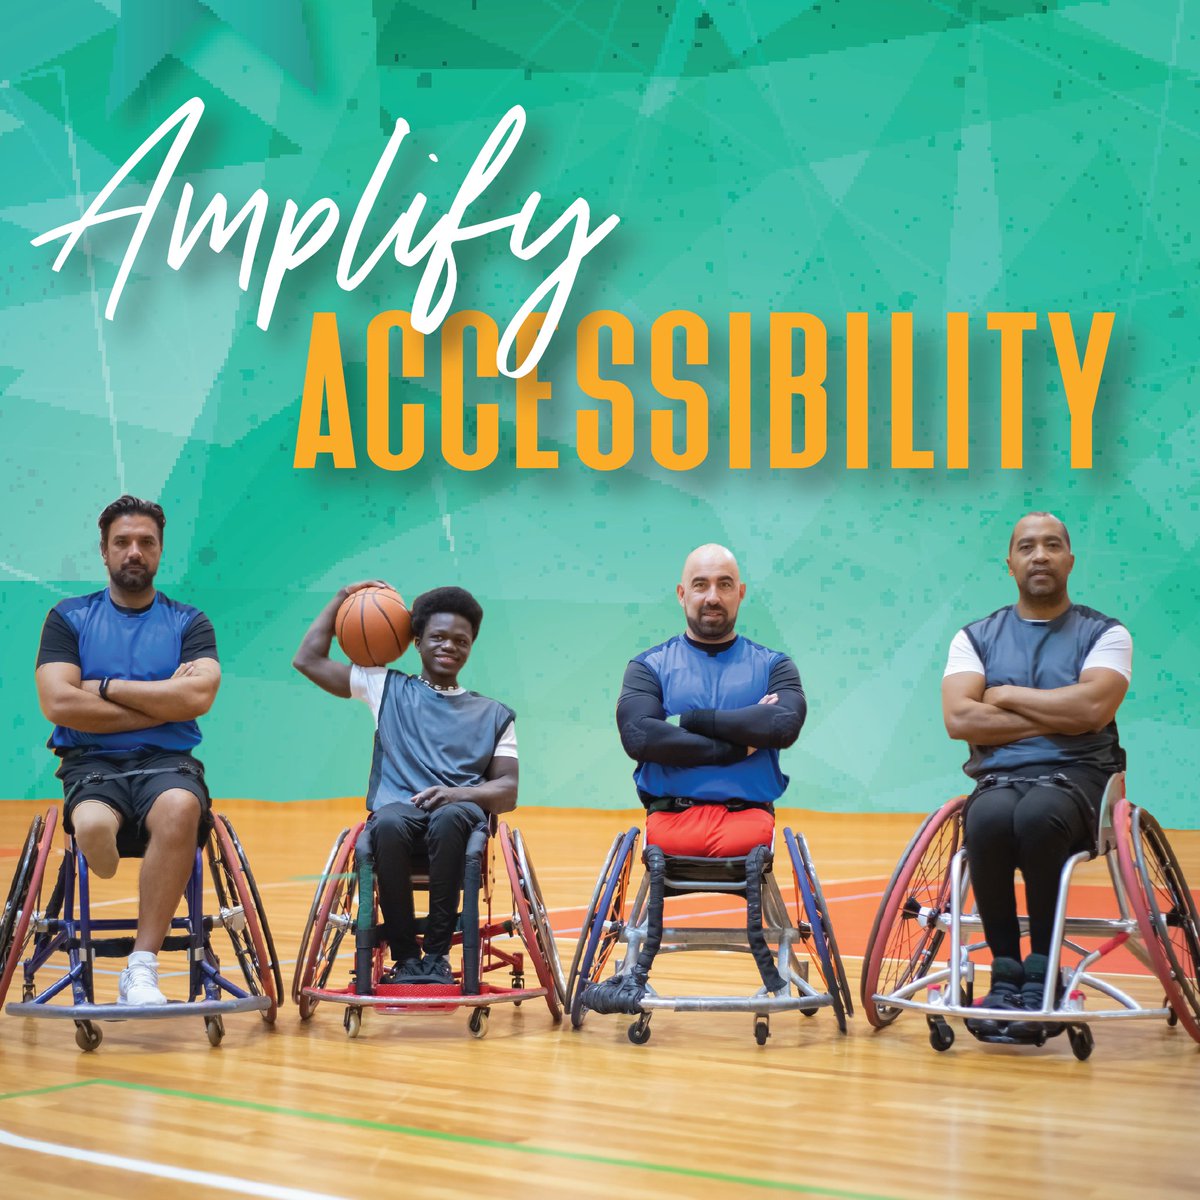 As we celebrate the anniversary of the Americans with Disabilities Act (ADA), we reflect on how this legislation has prompted greater inclusivity & accessibility within the mentoring field! Learn more about the ADA at: adaanniversary.org #ThanksToTheADA #MentoringAmplifies